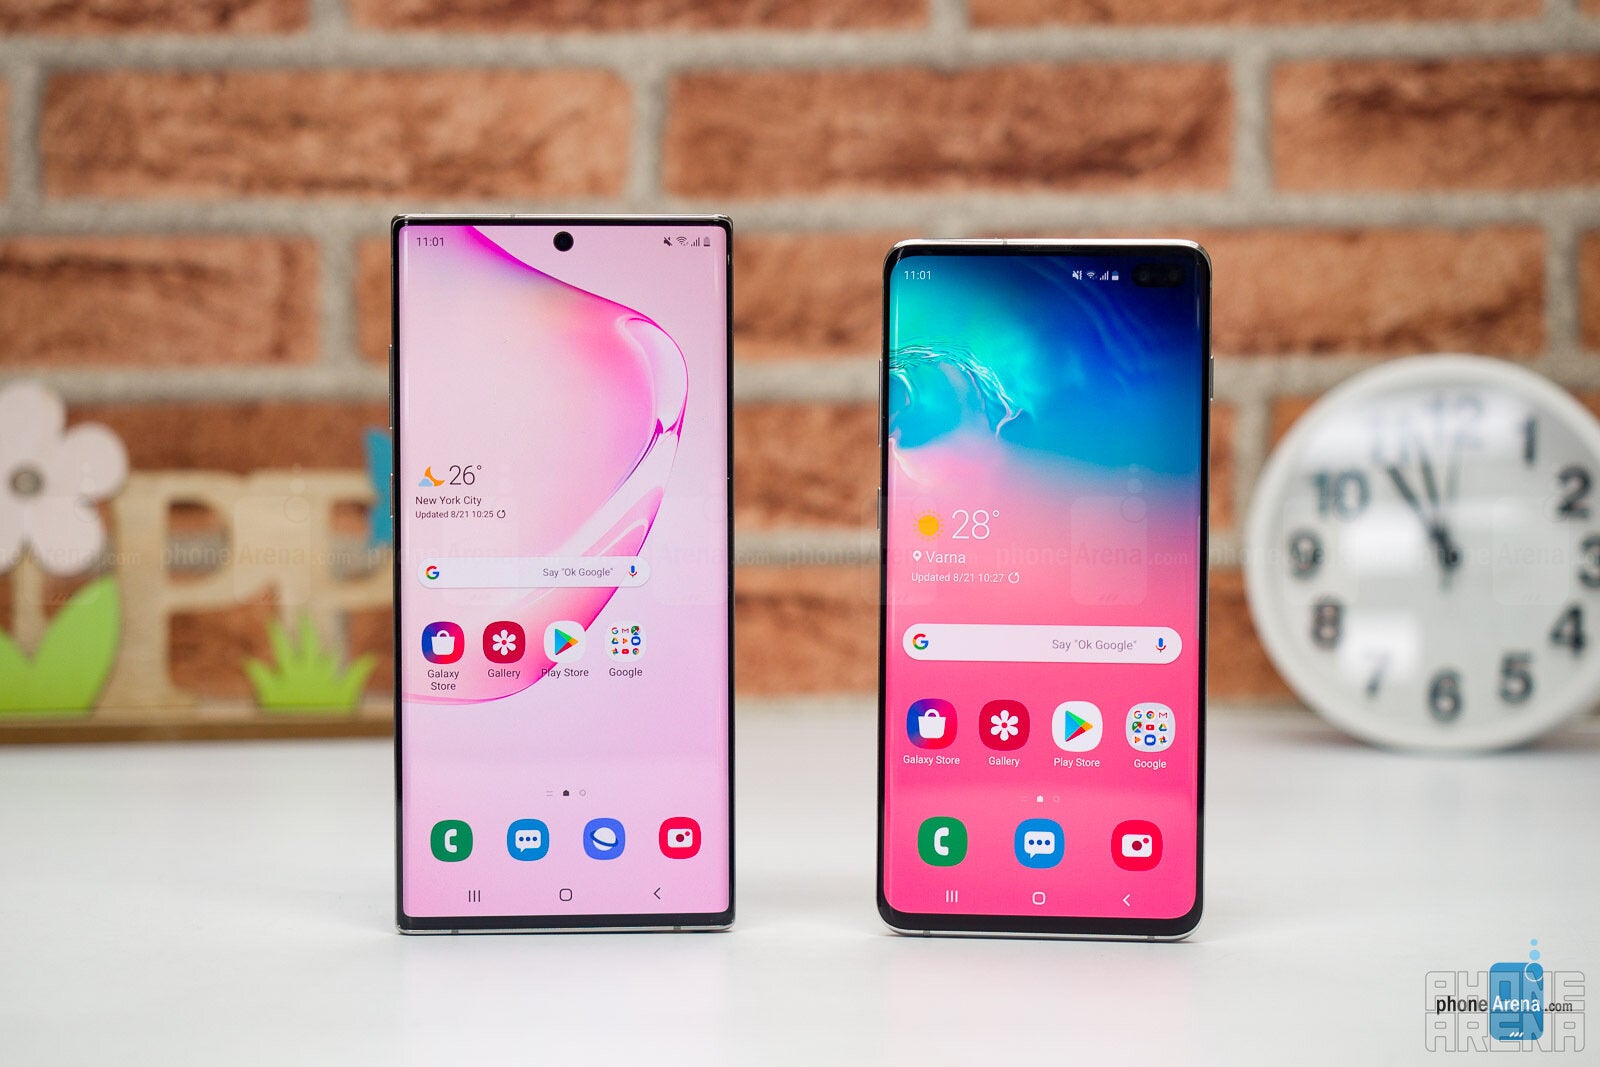 Samsung Galaxy Note 10 Plus Specs: Waterproof, SD Card, Colors, Camera &  More